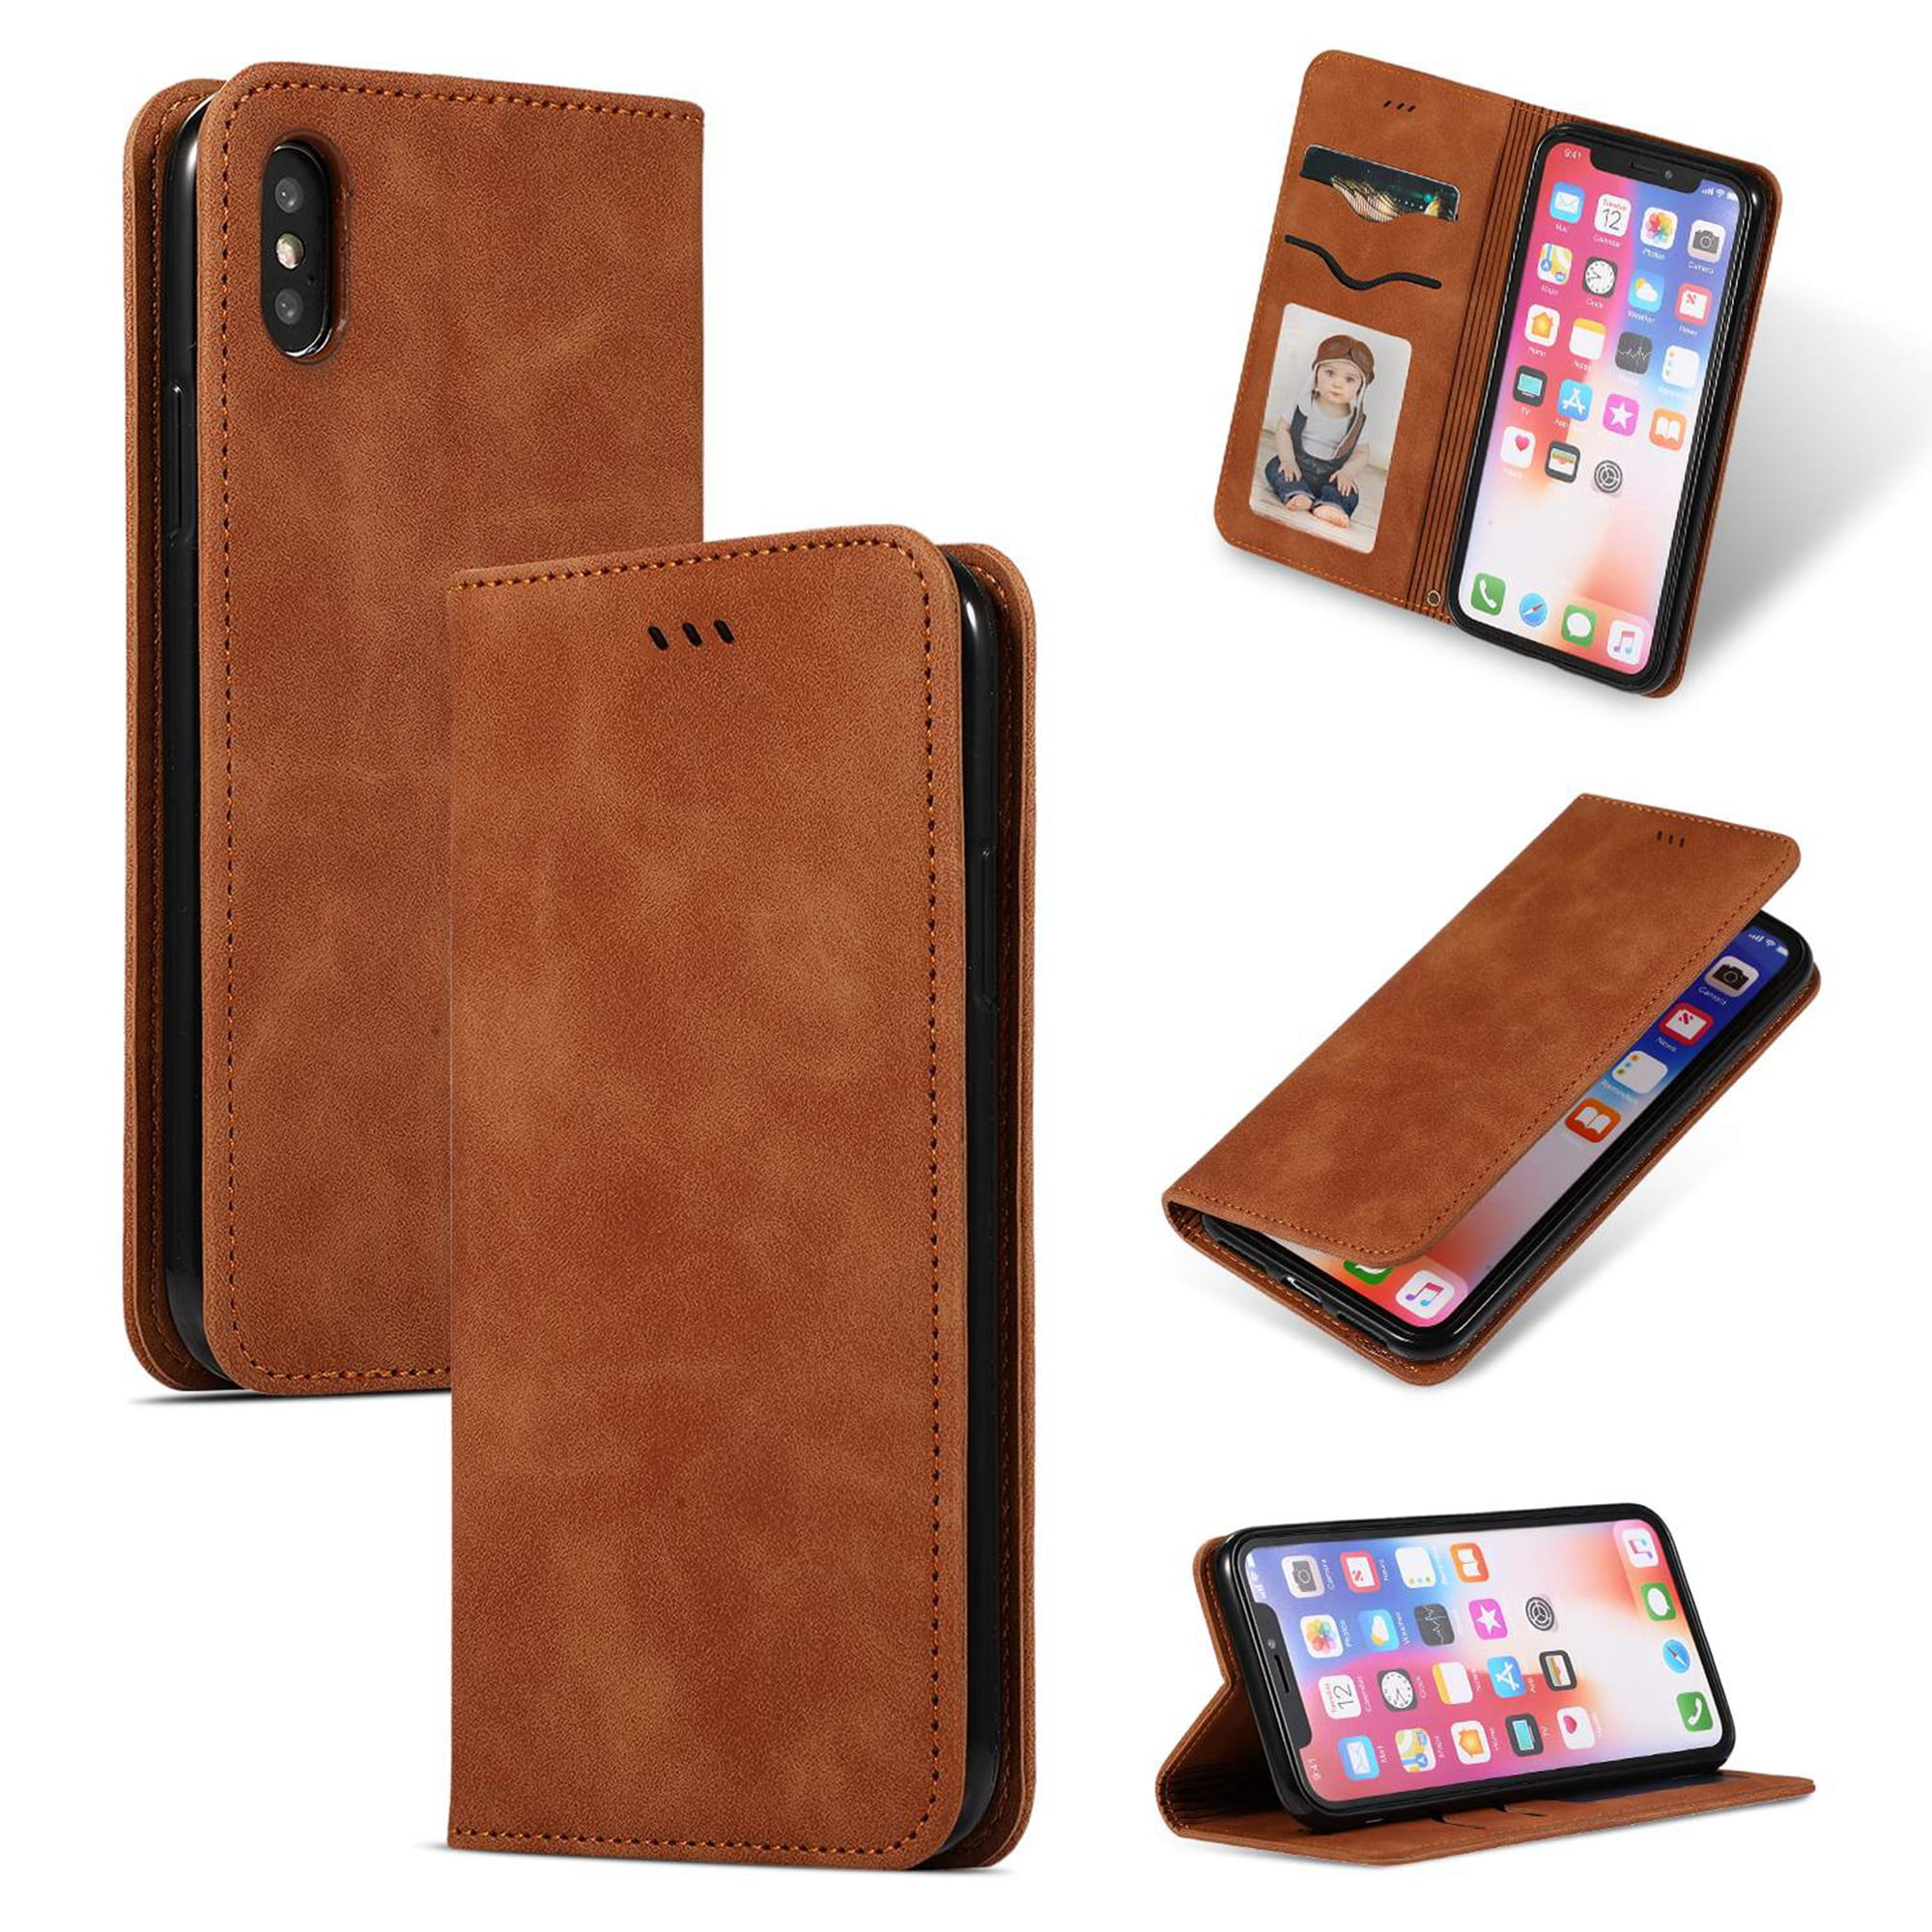 iPhone XS Max Leather Case, Dteck Smooth PU Leather Flip Folio Wallet Card Slots Case Cover ...